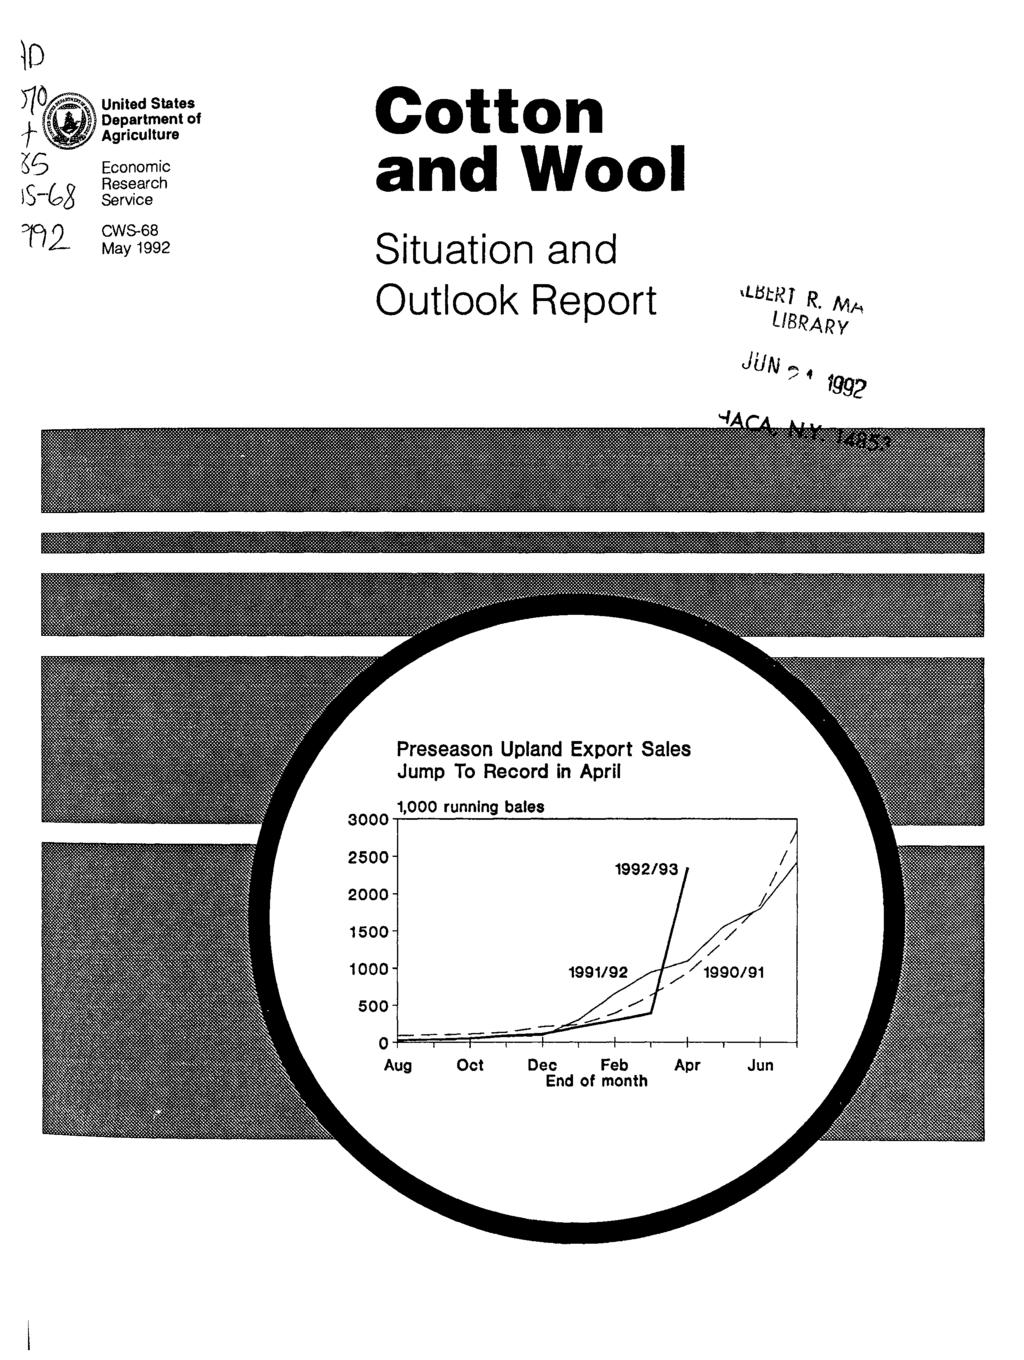 United States Department of Agriculture Economic Research Service CWS--68 May 992 Cotton and Wool Situation and Outlook Report \LJ3tRT R.